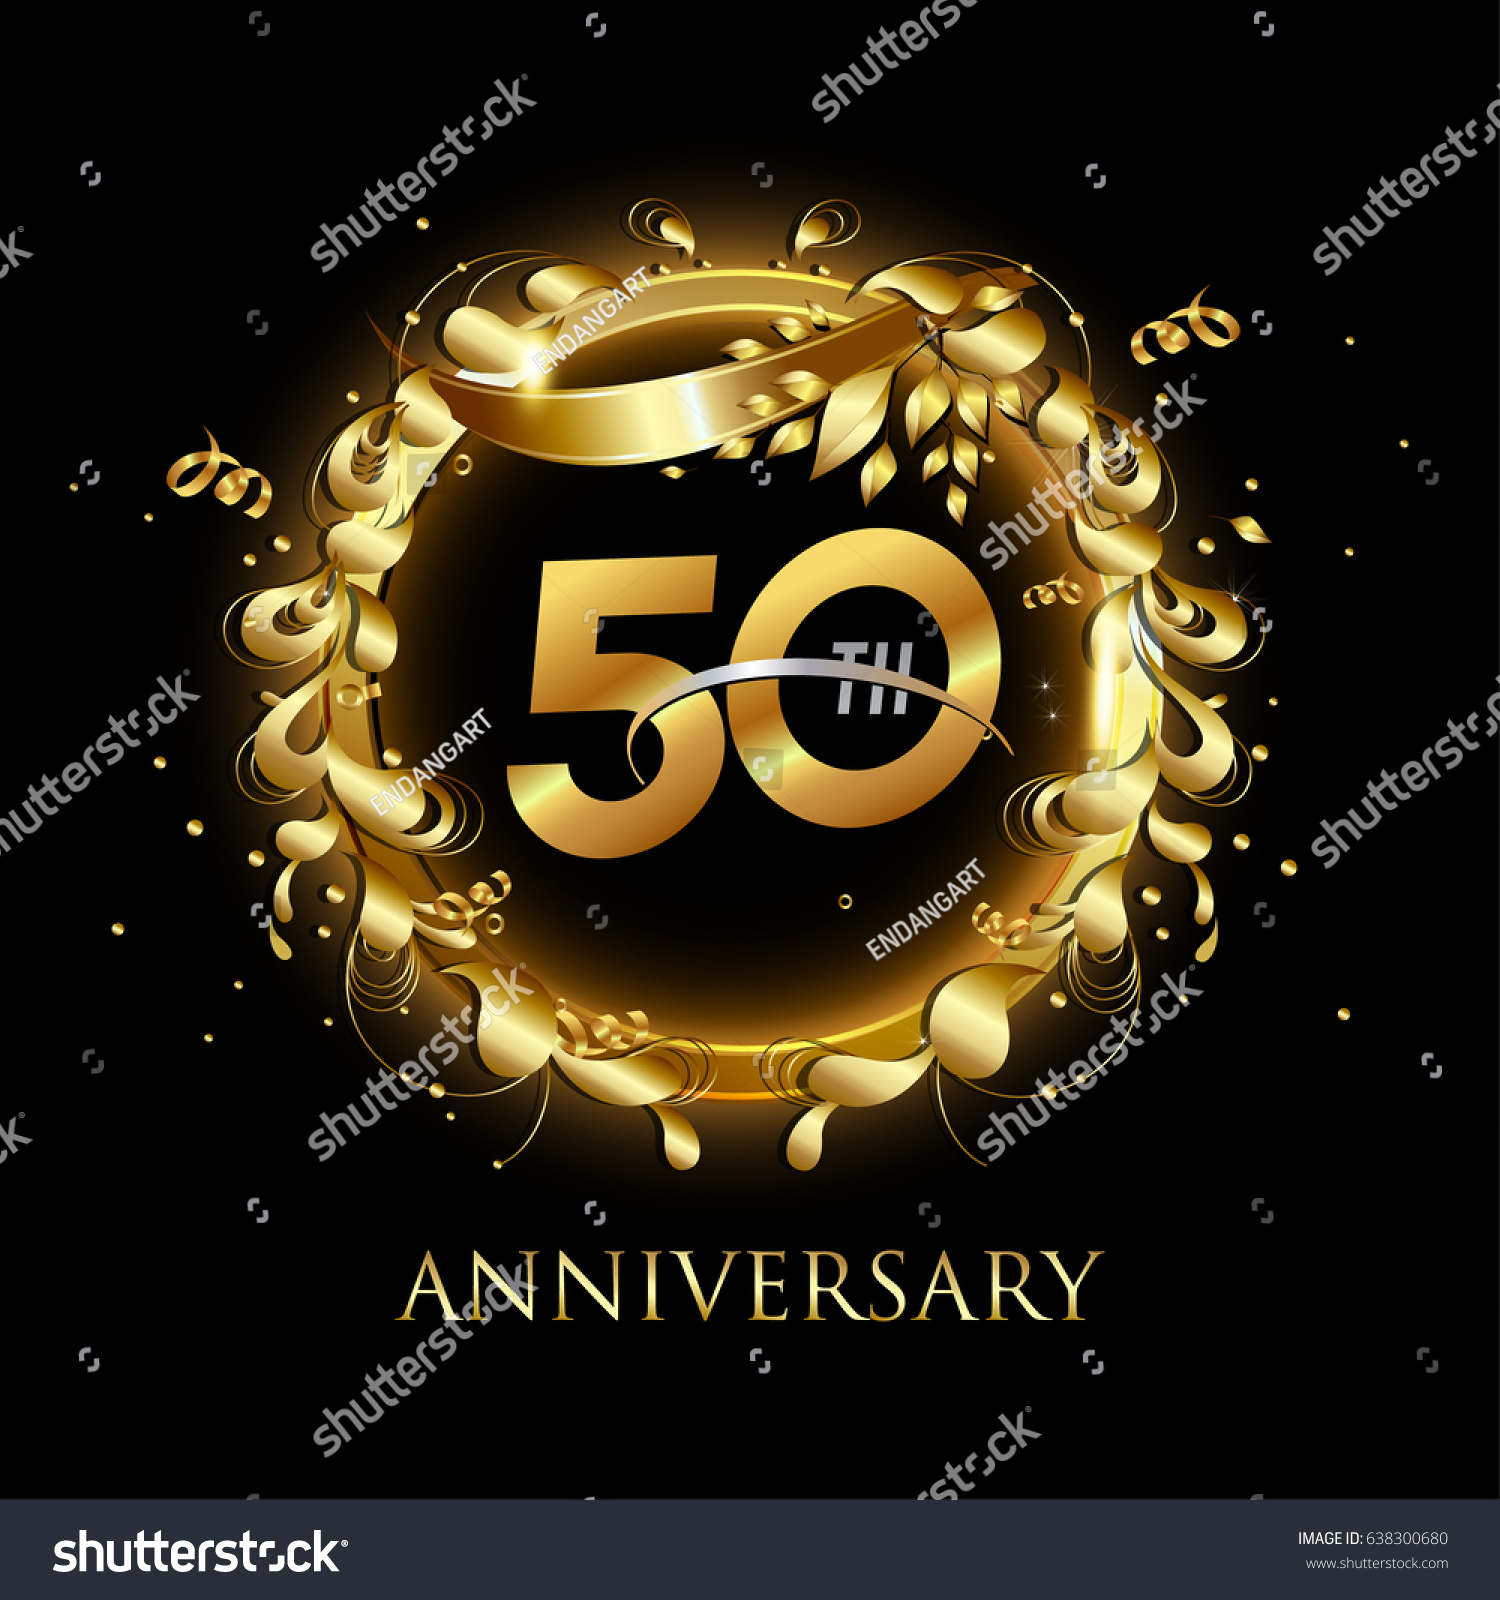 SVG of 50th gold anniversary celebration With confetti, ring, and abstract elements, isolated on dark background svg